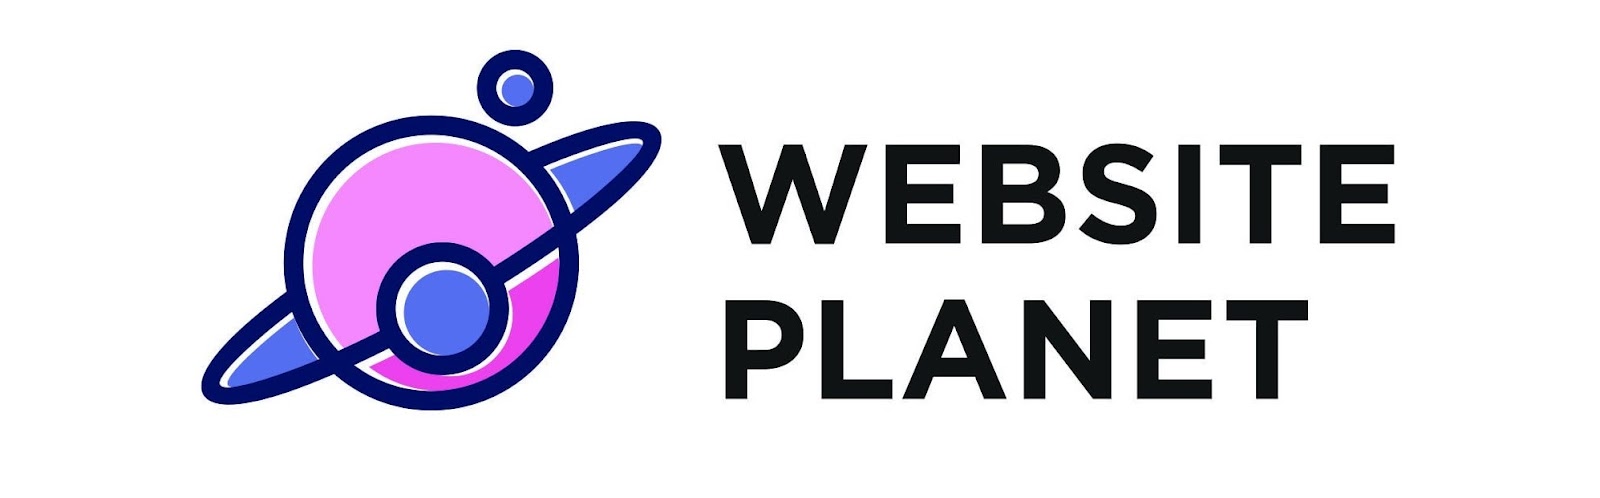 A logo created by a 99designs designer 'Jatmiko', for Website Planet